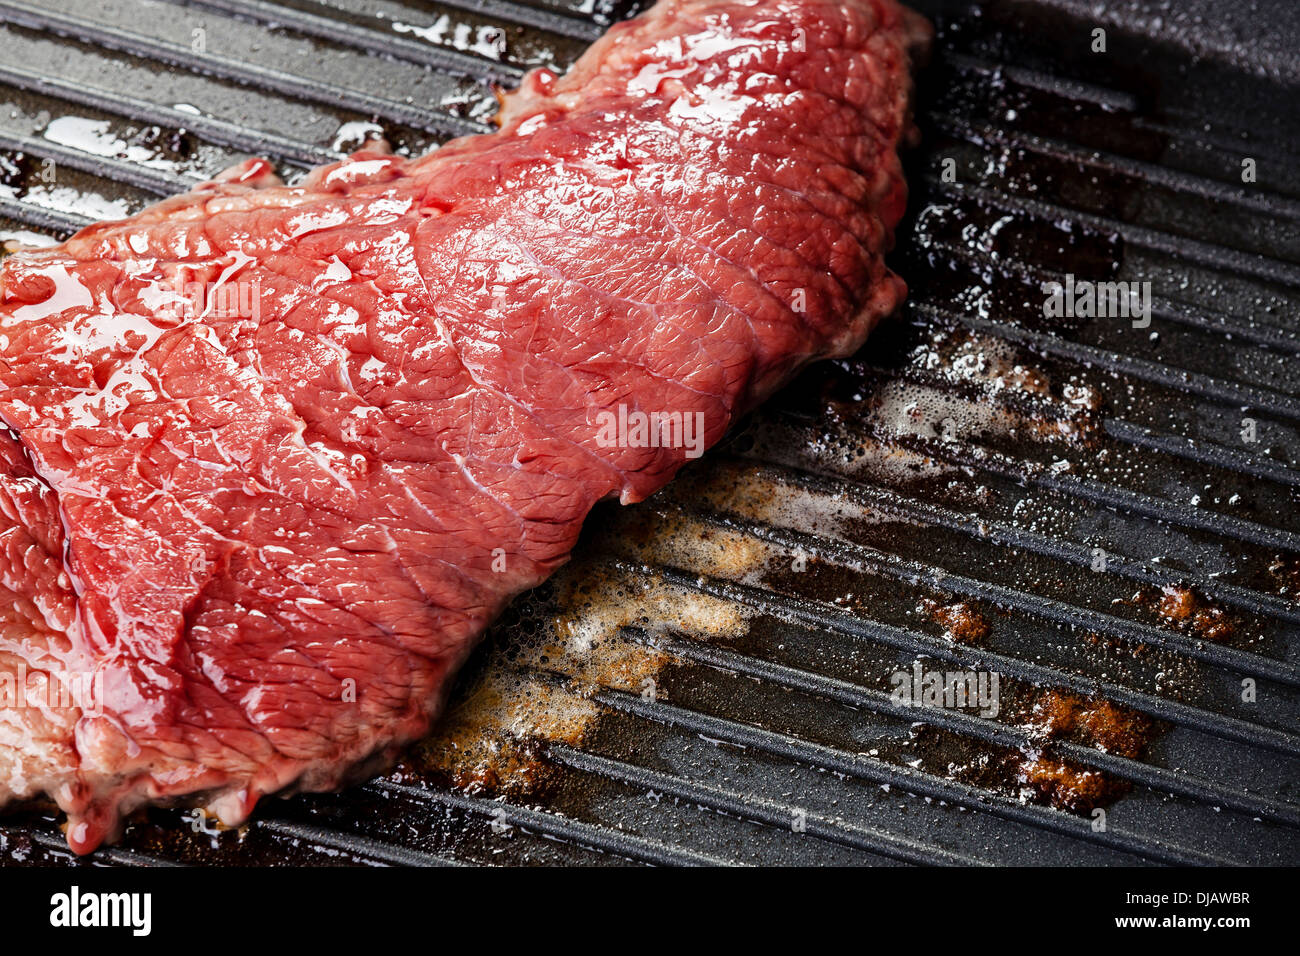 Bloody beef steak on grill pan background Stock Photo